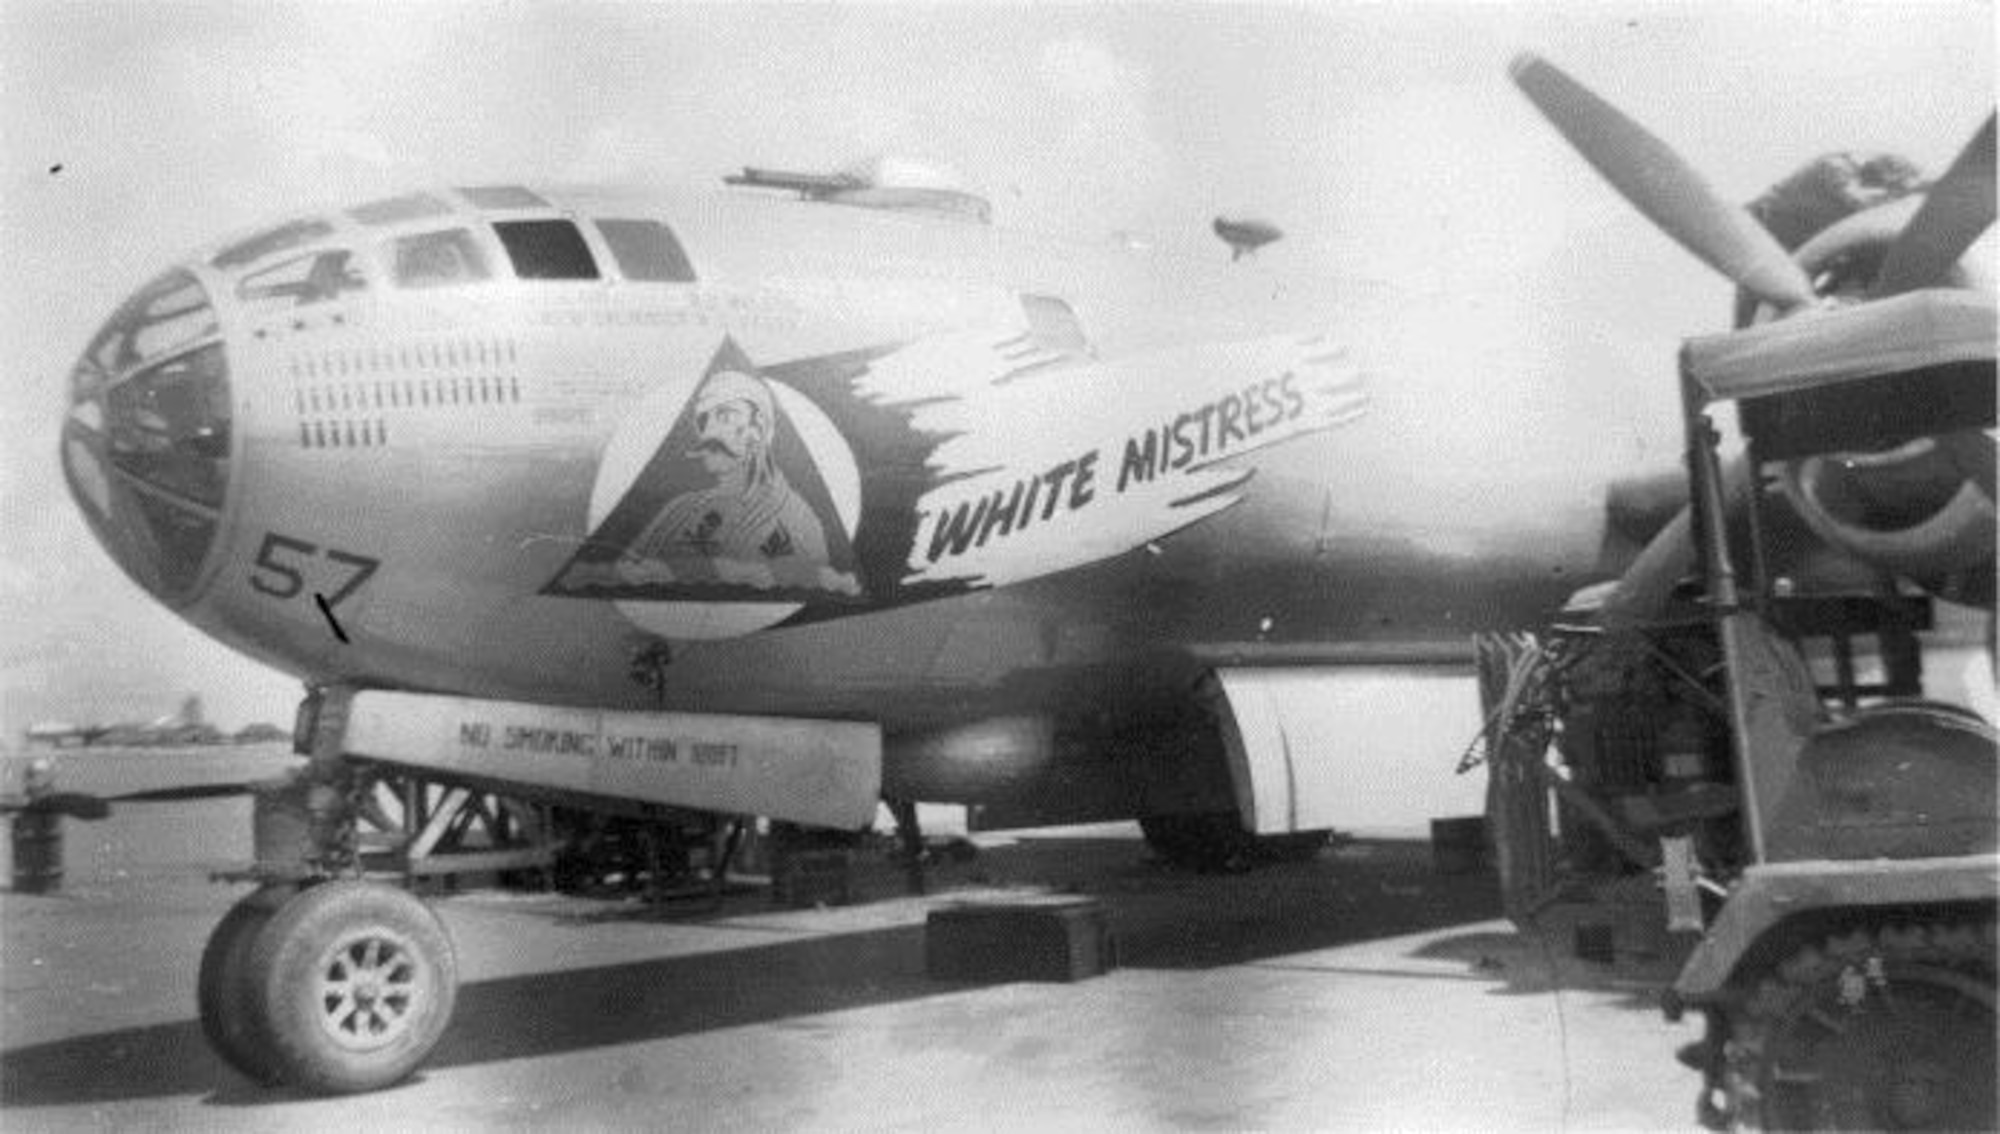 Mrs. Shirley Bates father Ralph C. Wilson was the aircraft commander of the Wilson Crew (Crew # 4007) of the 40th Bomb Squadron, who flew the Superfortress “White Mistress,” a B-29-50-BW, serial number 42-24776.  (Courtesy Ms. Elizabeth Koch-Colson, via 6th Bomb Group Association)